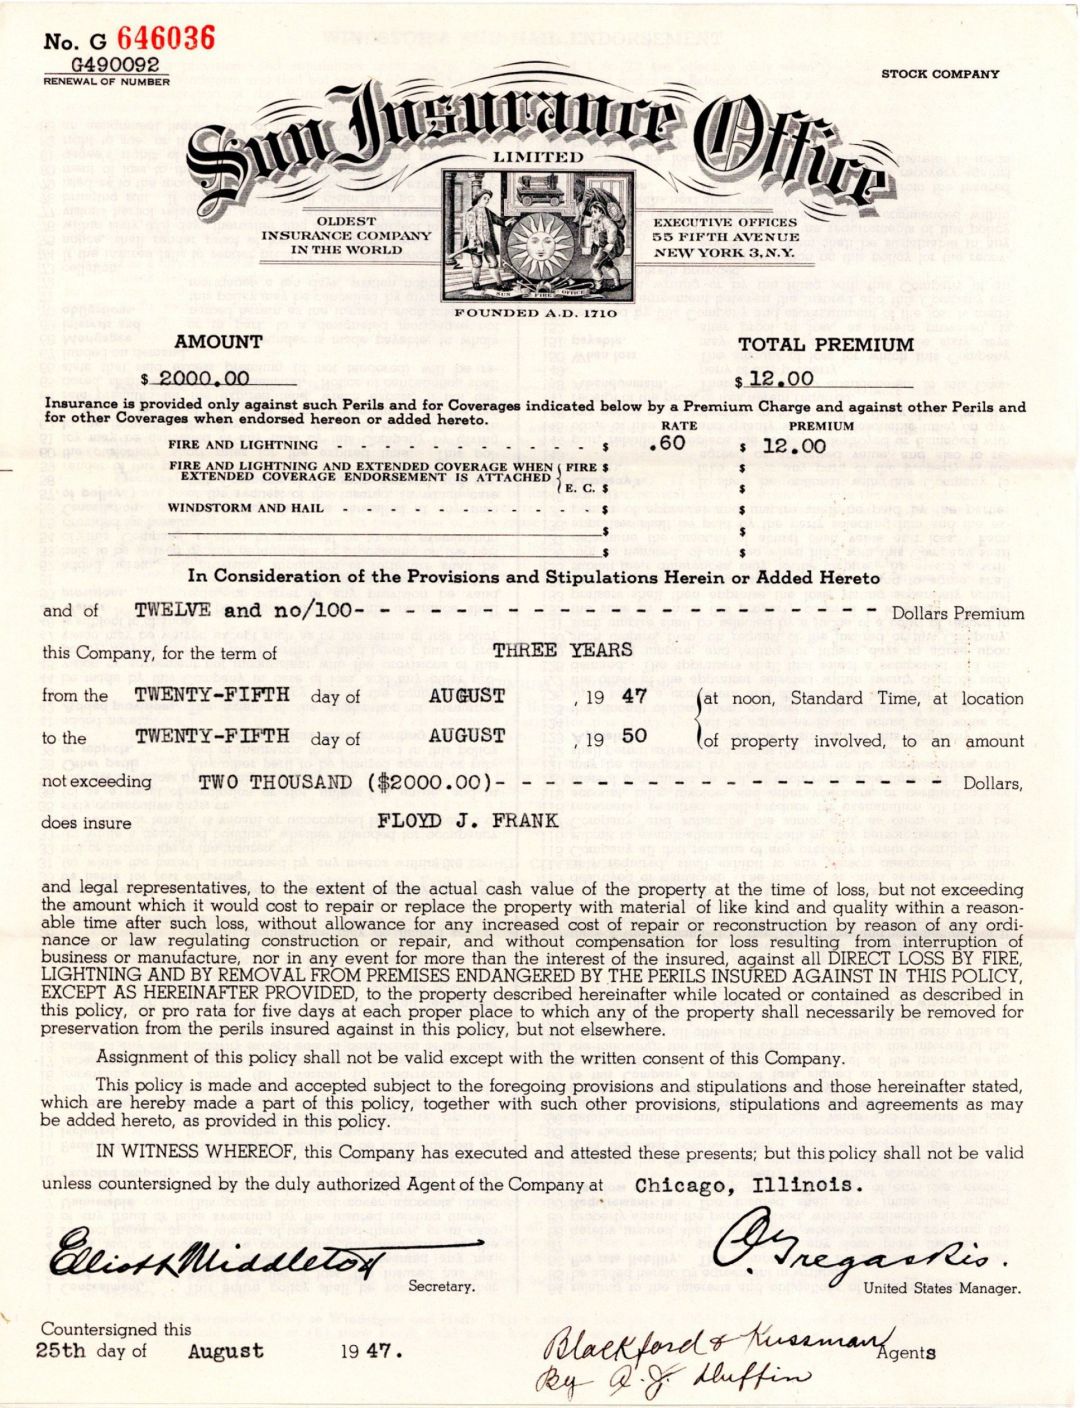 Sun Insurance Co. Policy - 1950 dated Insurance Policy - Americana